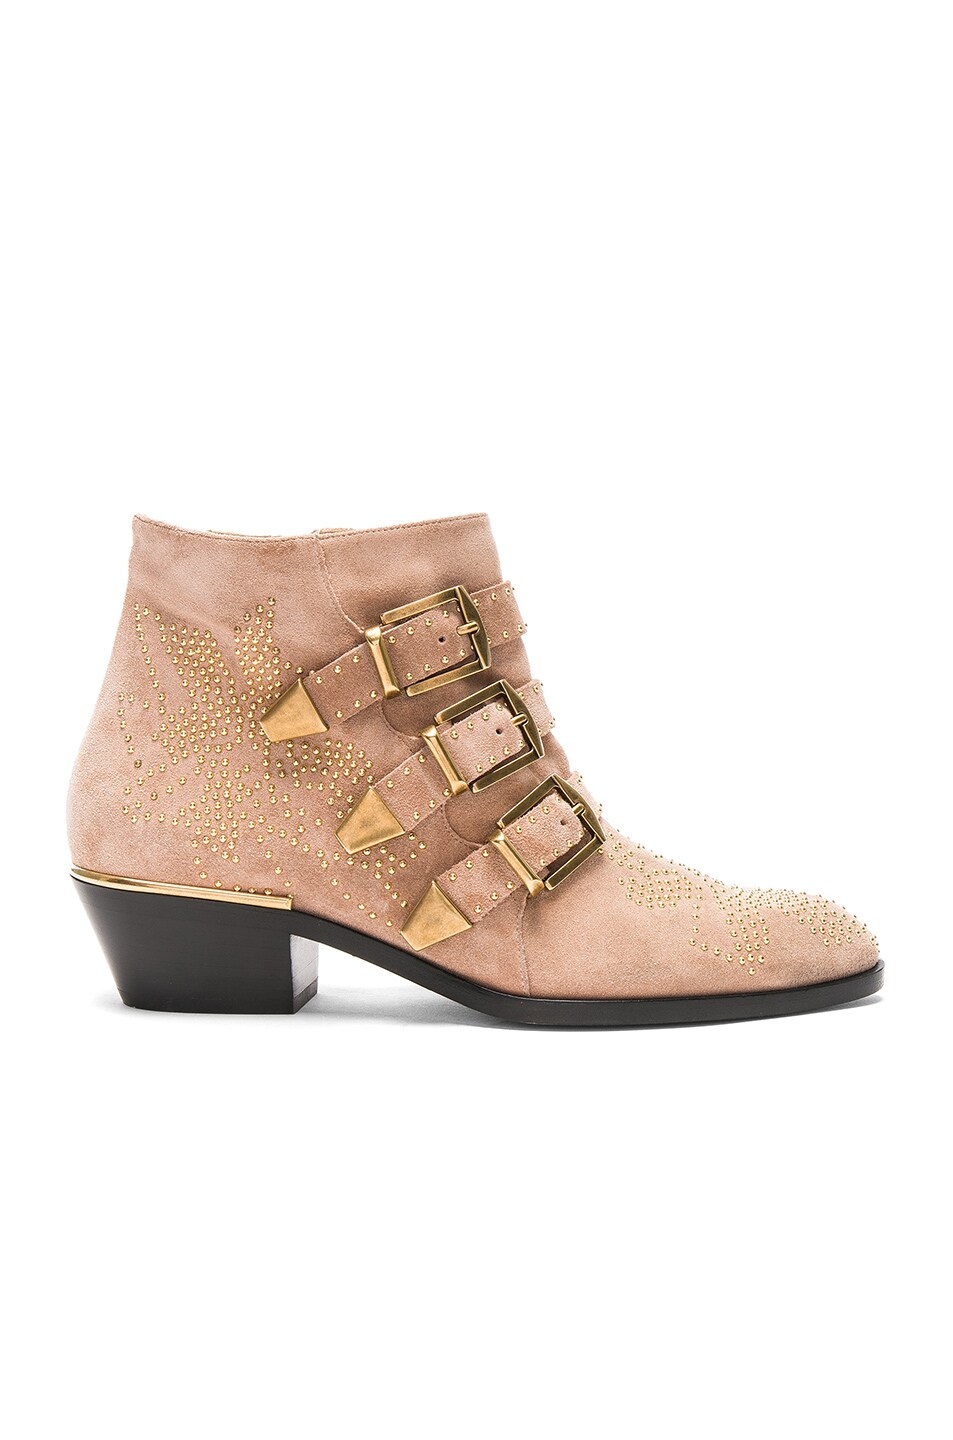 Image 1 of Chloe Susanna Suede Boots in Maple Pink